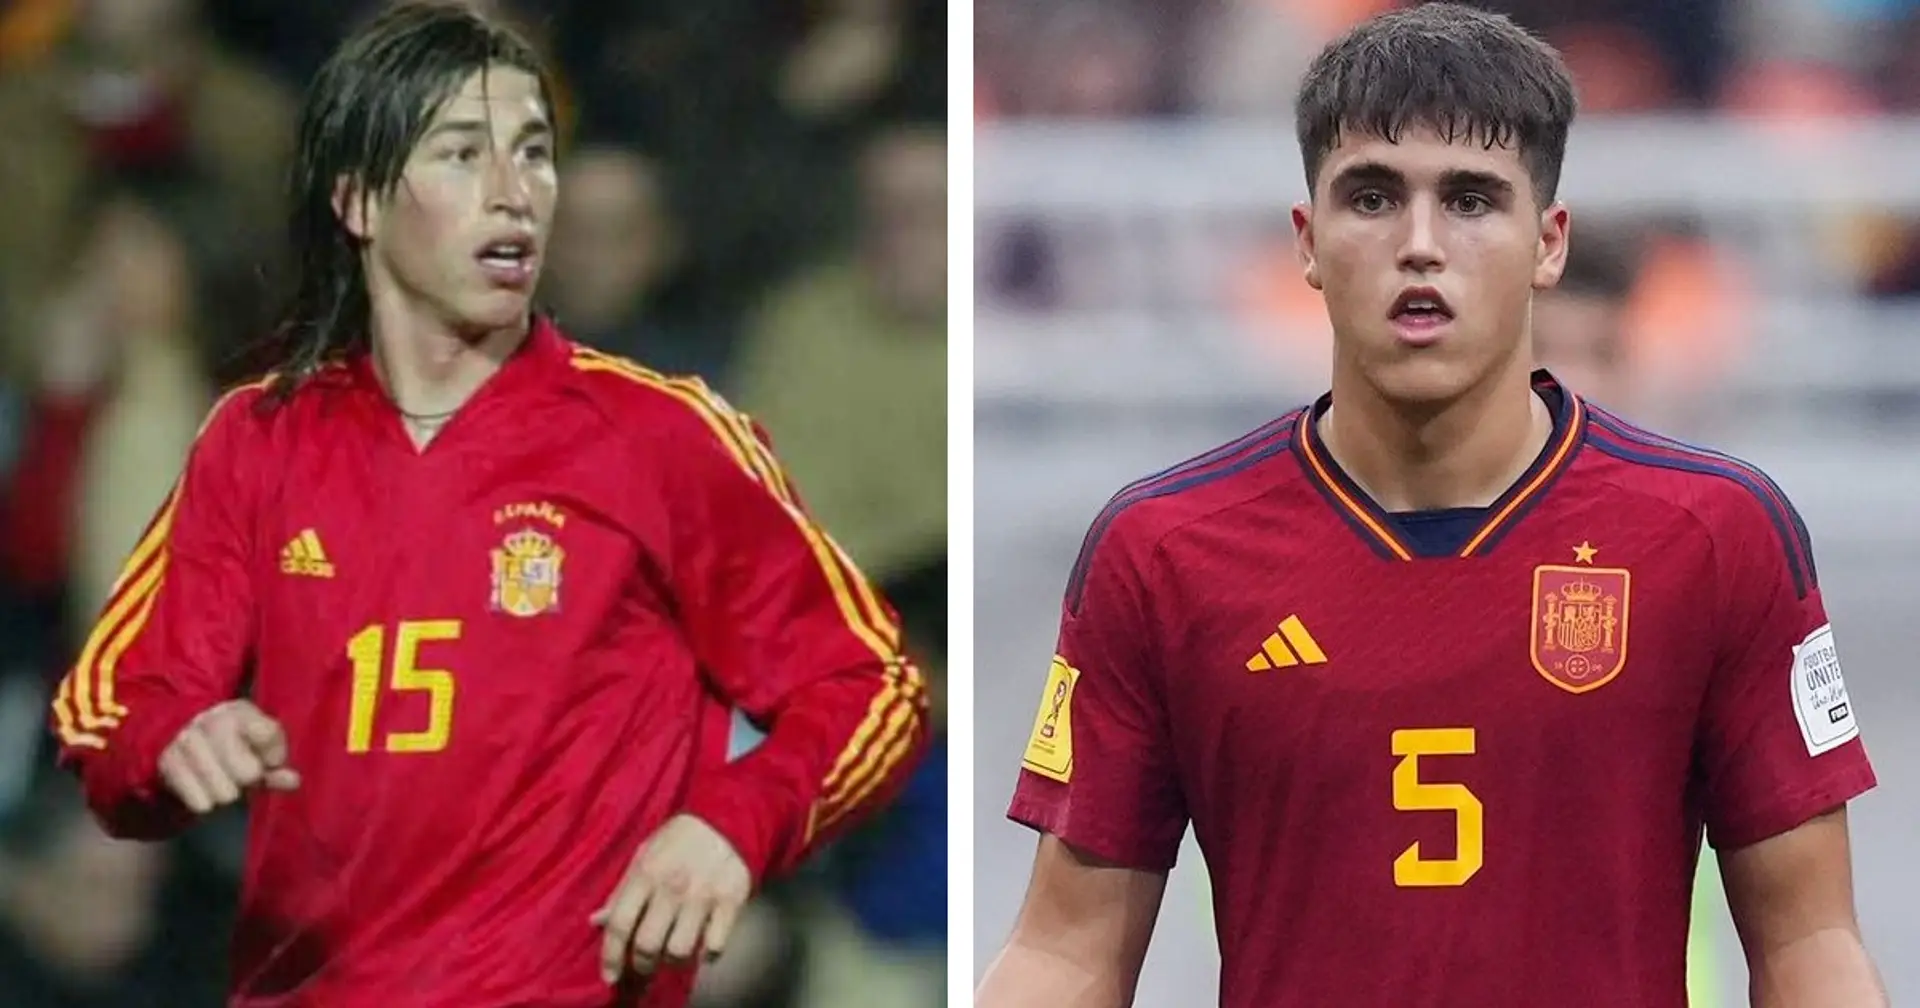 'It would be a dream come true': Cubarsi opens up on potentially beating Sergio Ramos' record